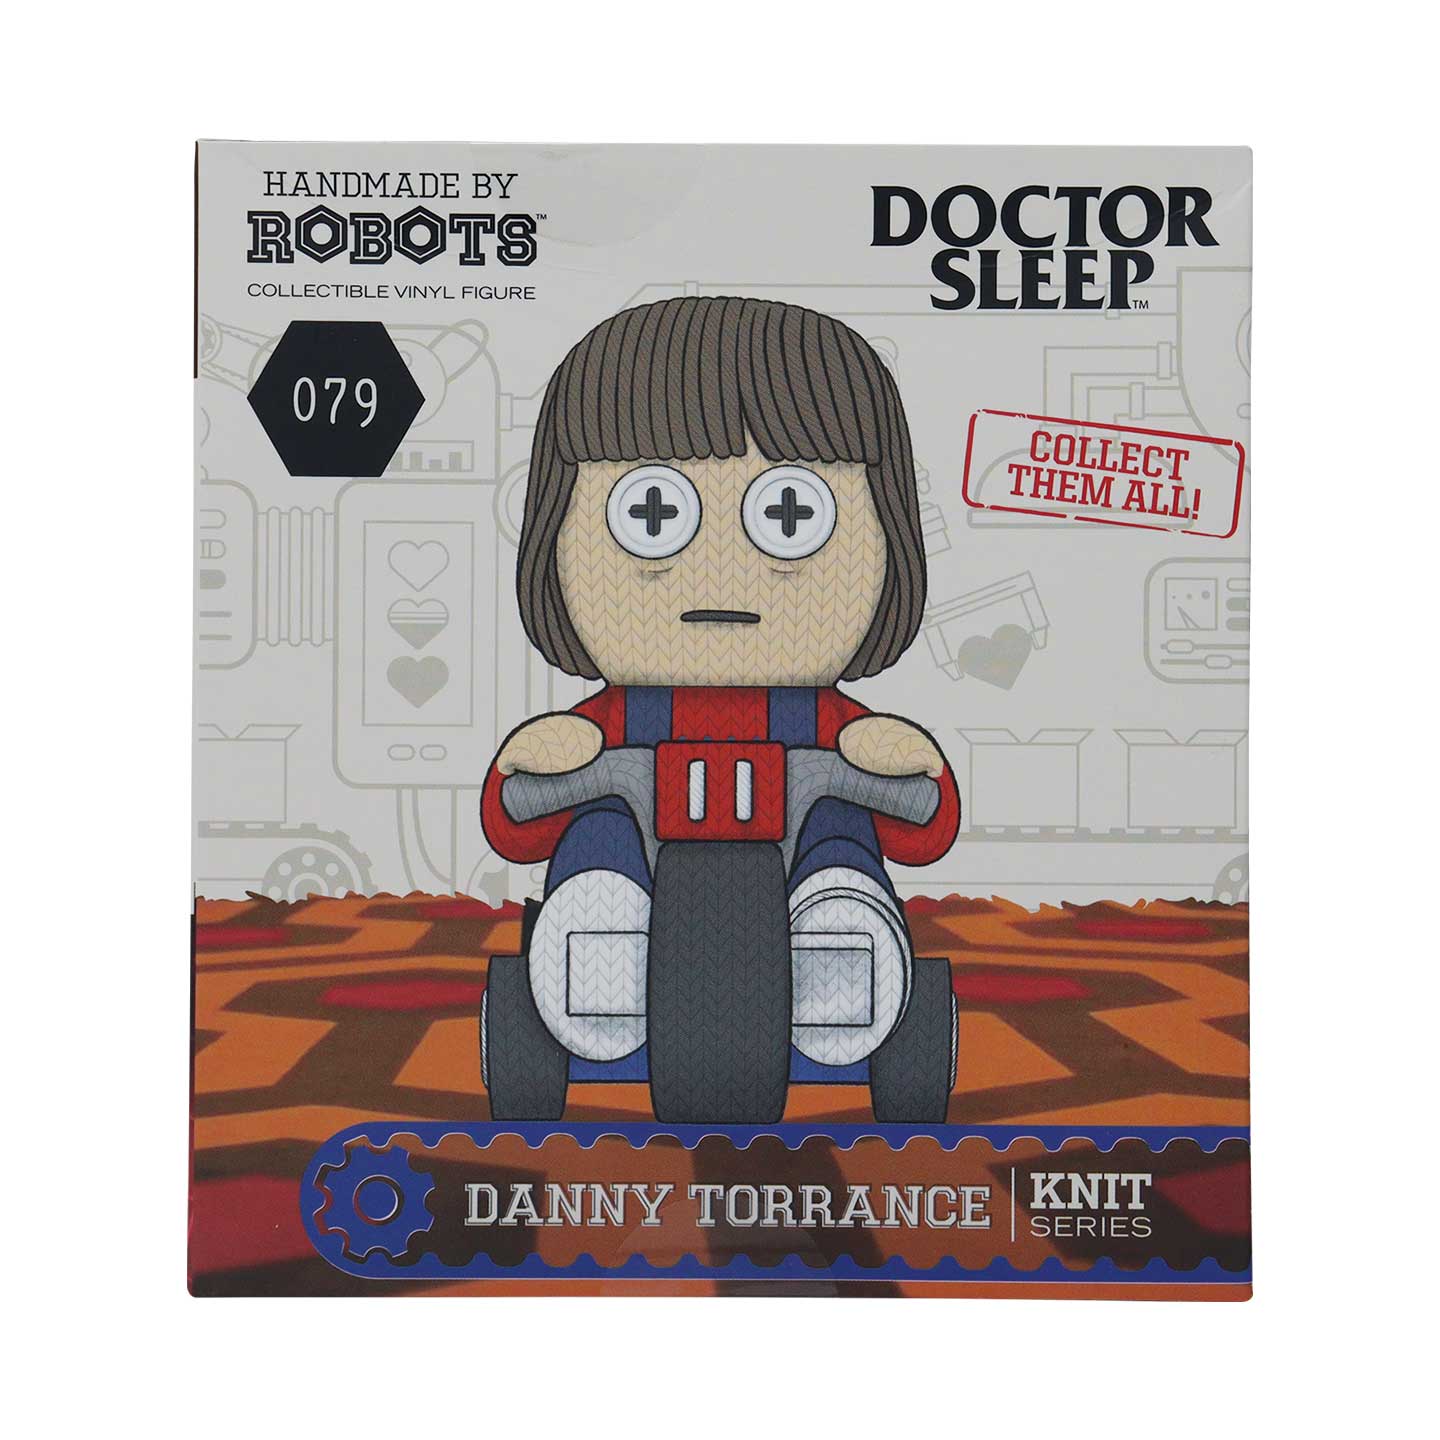 The Shining - Danny Torrence Collectible Vinyl Figure from Handmade by Robots